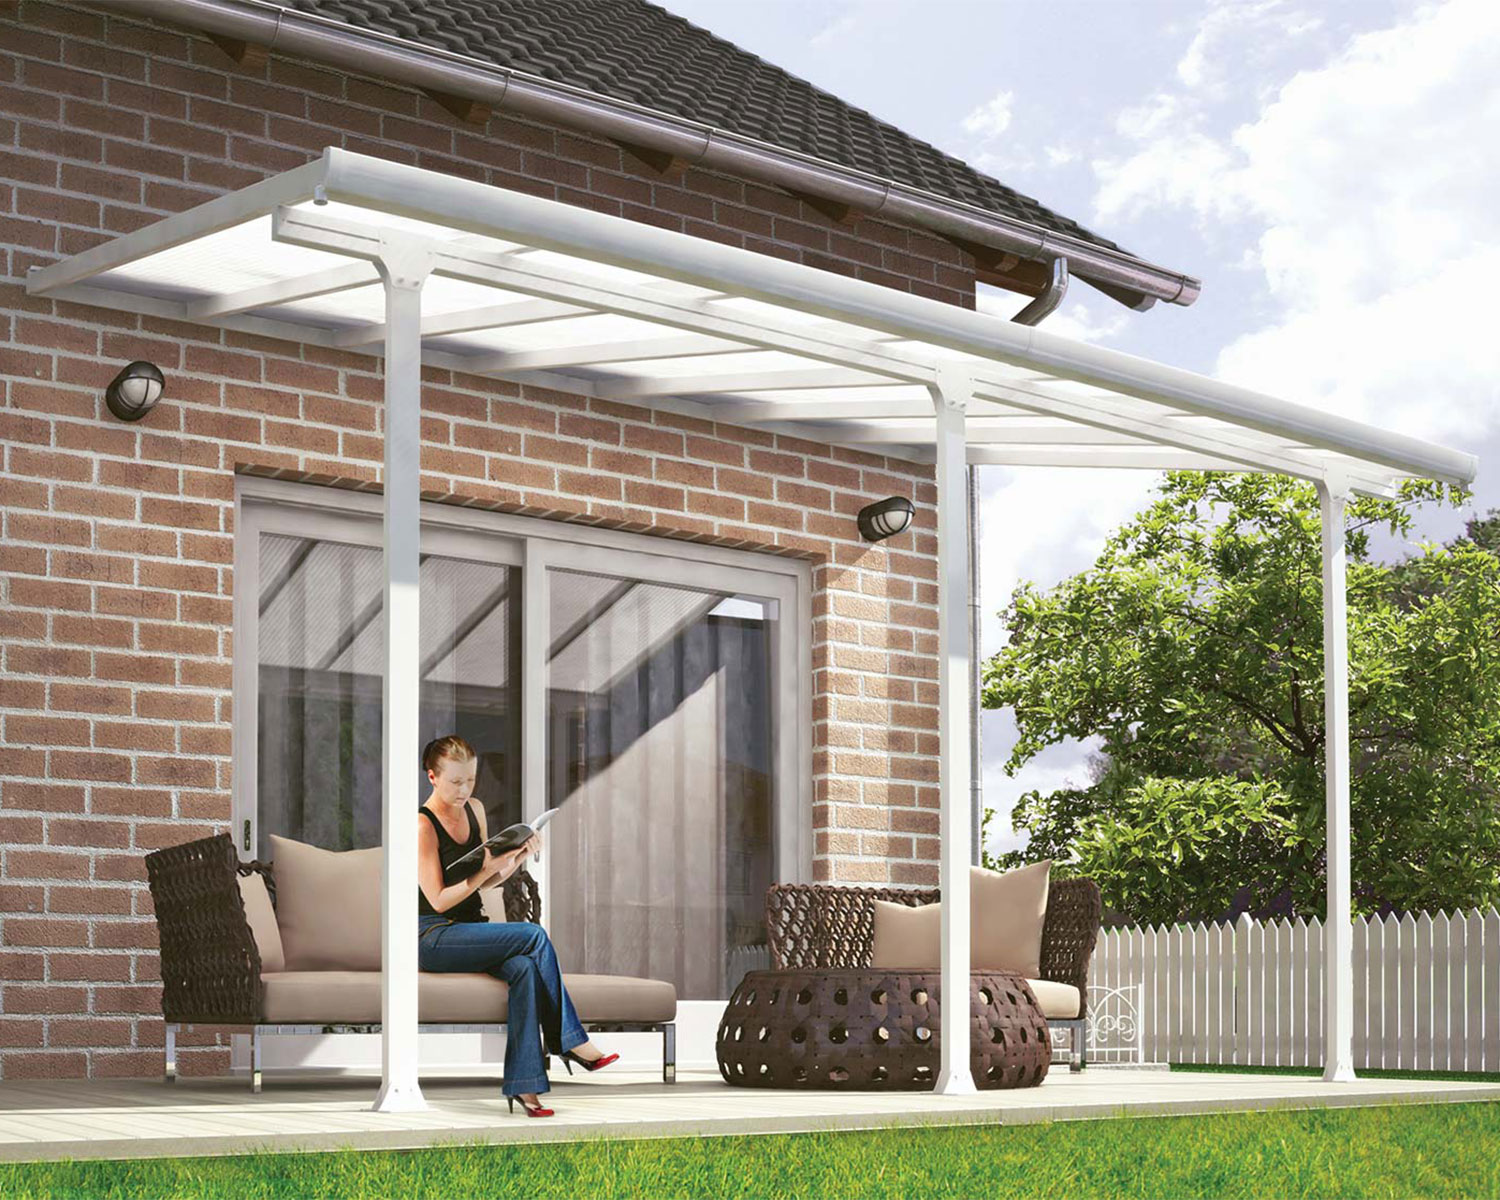 White Aluminium Patio Cover 10 ft. x 14 ft. attached to the house, polycarbonate roof panels to protect patio furniture